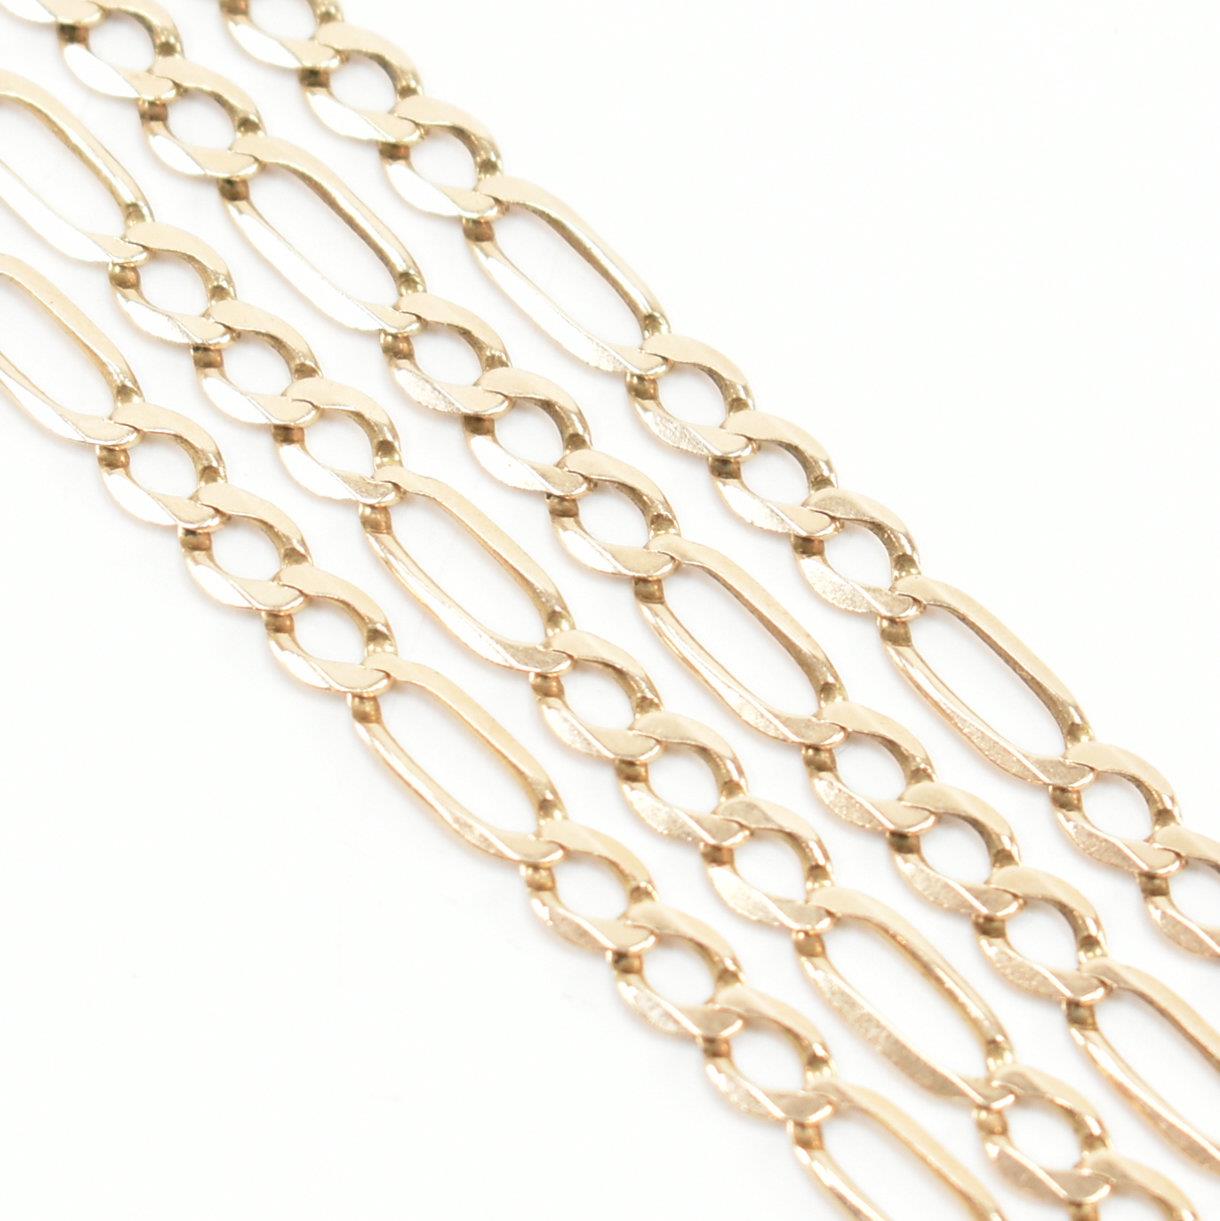 HALLMARKED 9CT GOLD FIGARO CHAIN NECKLACE - Image 3 of 5